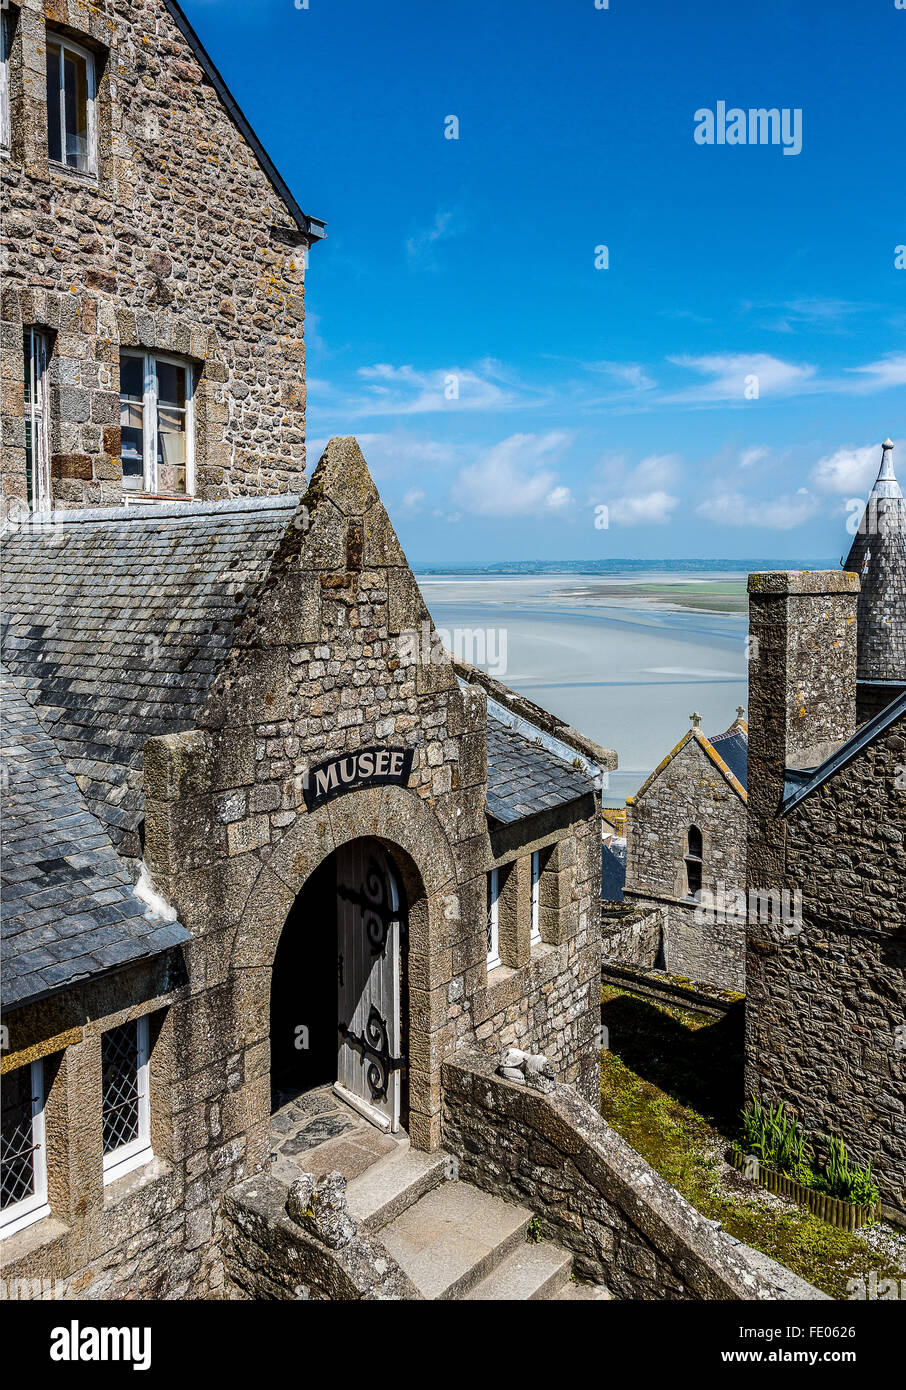 France, Normandy, the museum of the medieval village of Mont St Michel Stock Photo